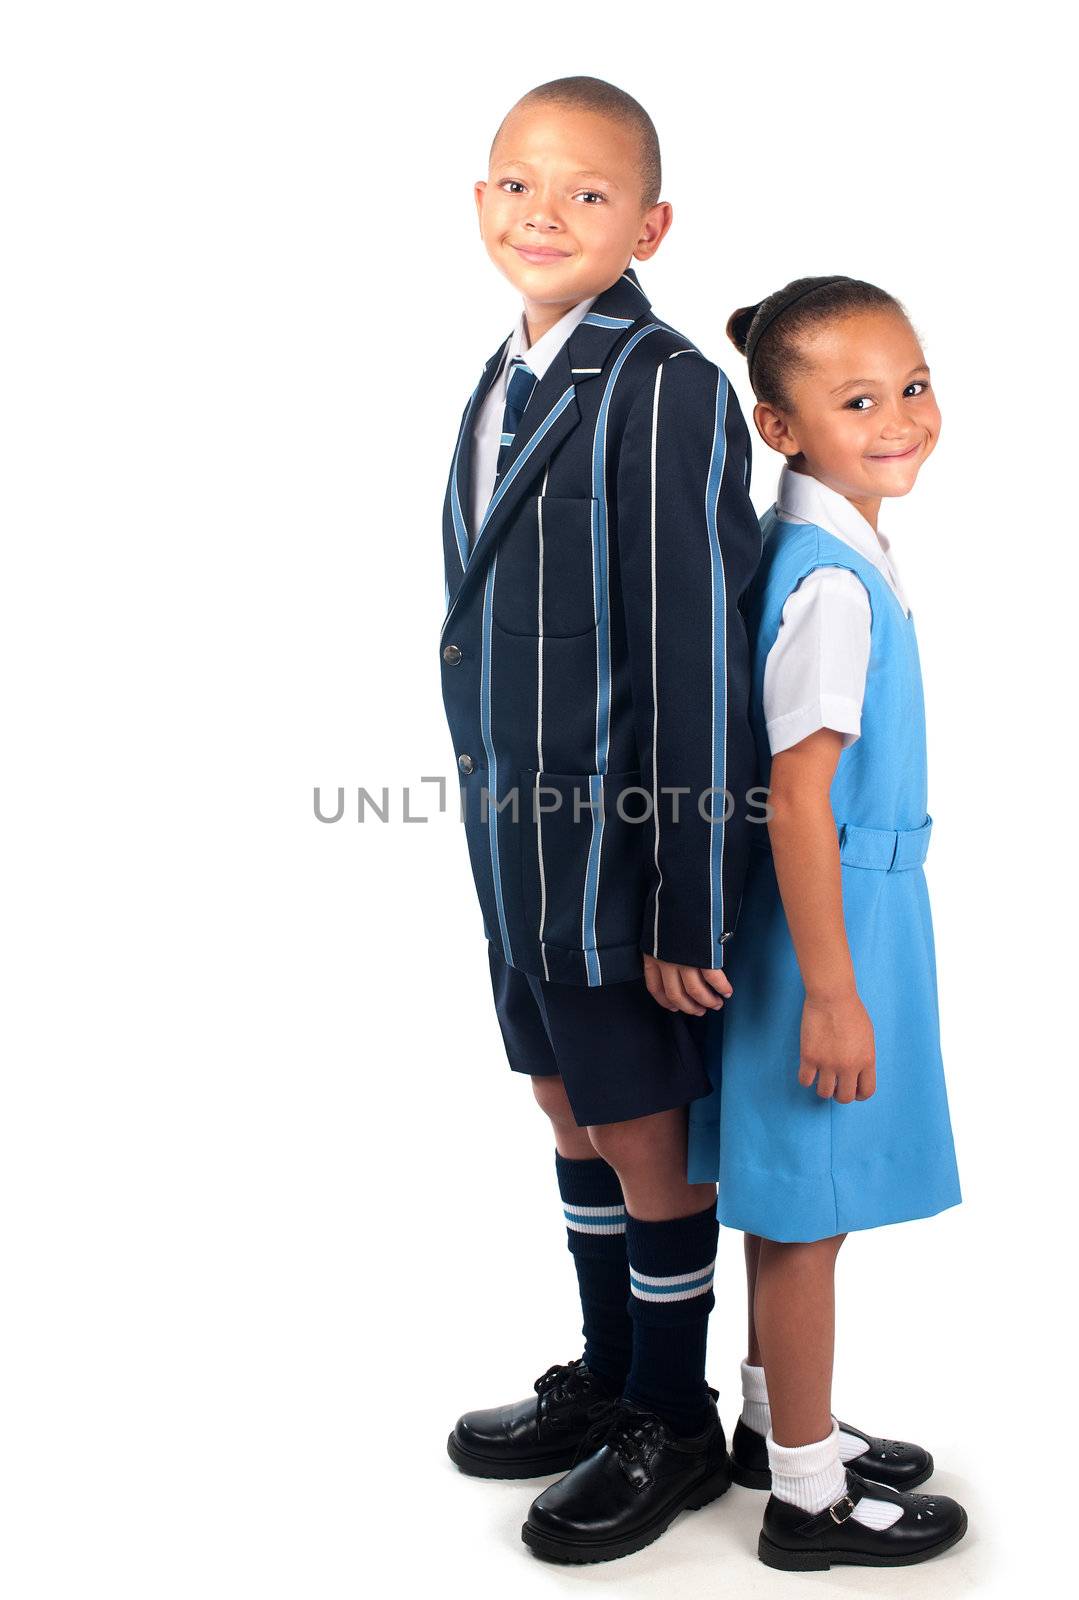 A happy brother and sister in school uniform appear ready to go to school